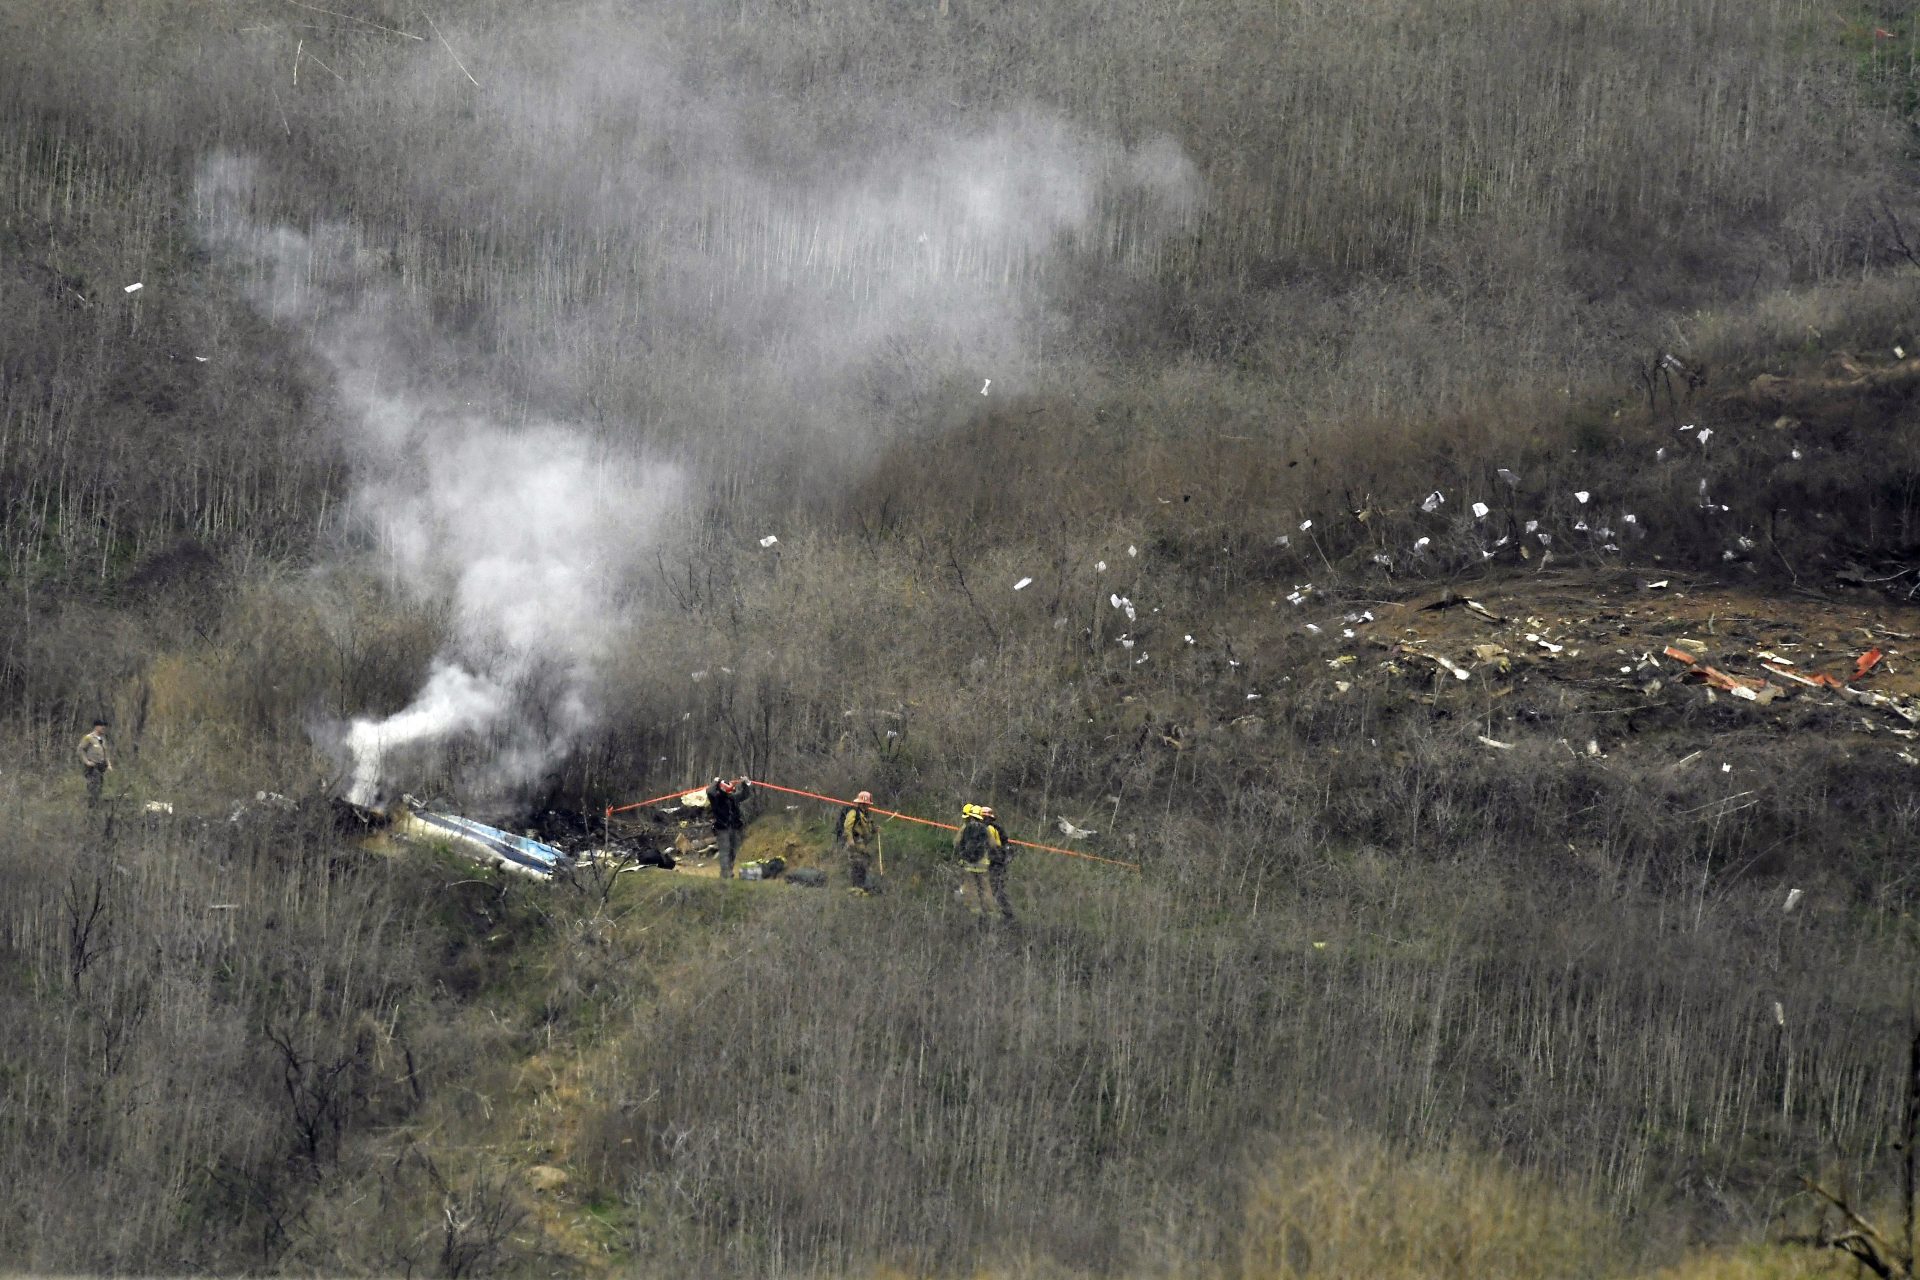 Firefighters work the scene of a helicopter crash Sunday, Jan. 26, 2020, in Calabasas, Calif. NBA basketball legend Kobe Bryant, his teenage daughter Gianna and three others were killed in the crash in Southern California on Sunday.